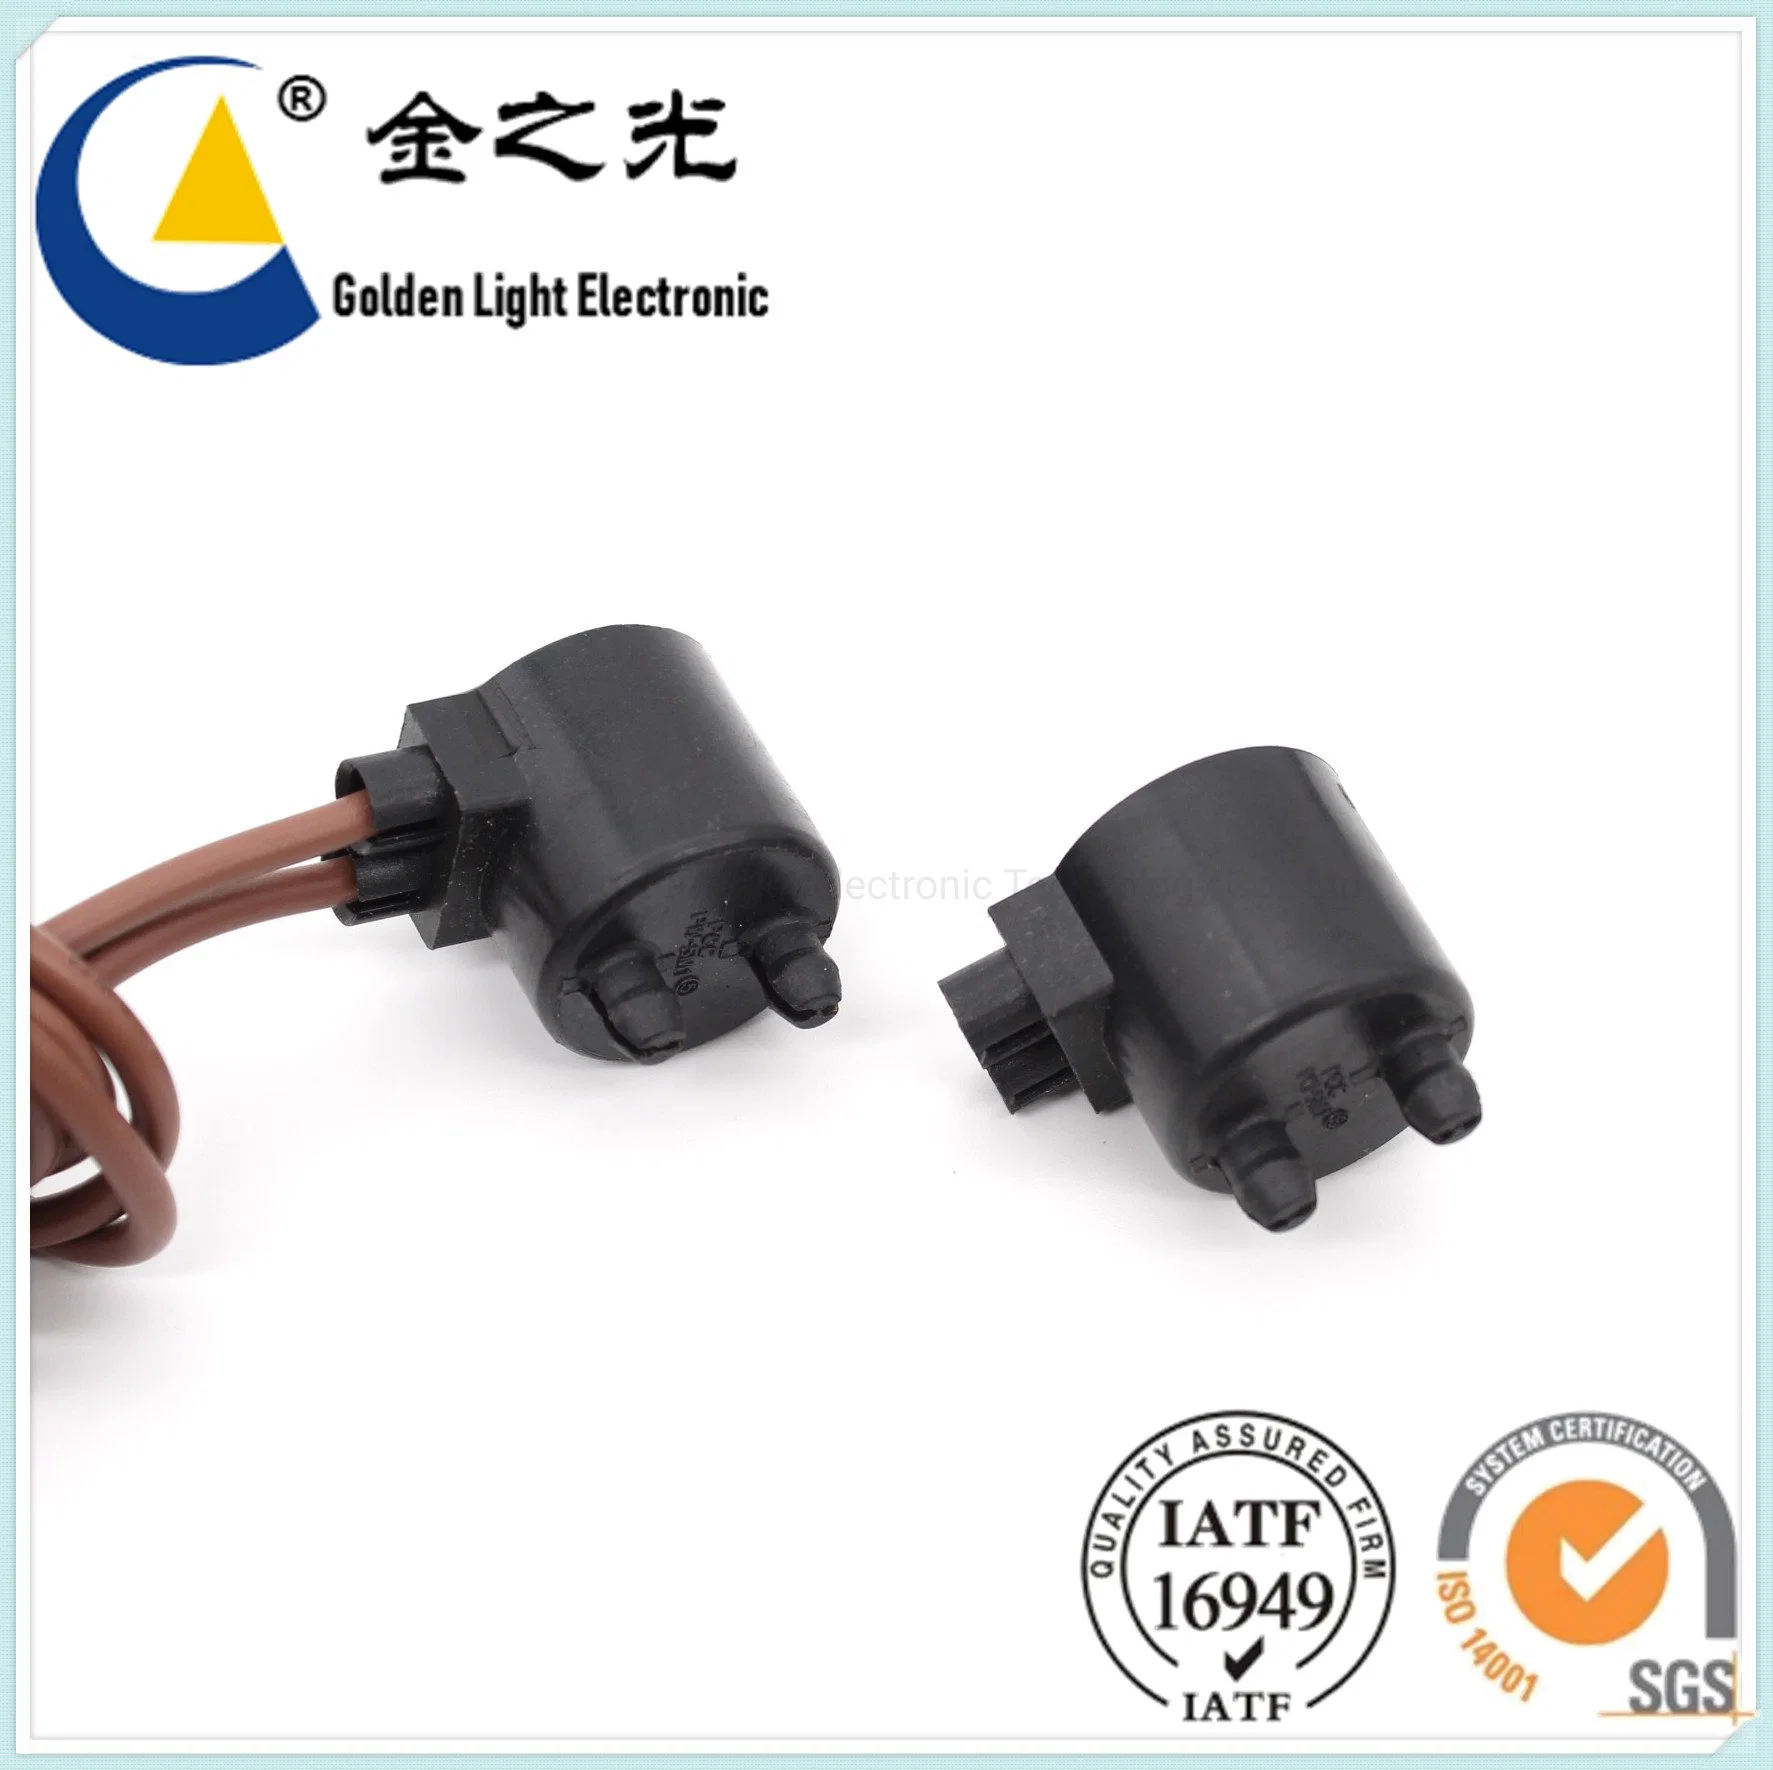 Magnetic Reed Switch Proximity Switch Sensor for Security and Safety Equipment